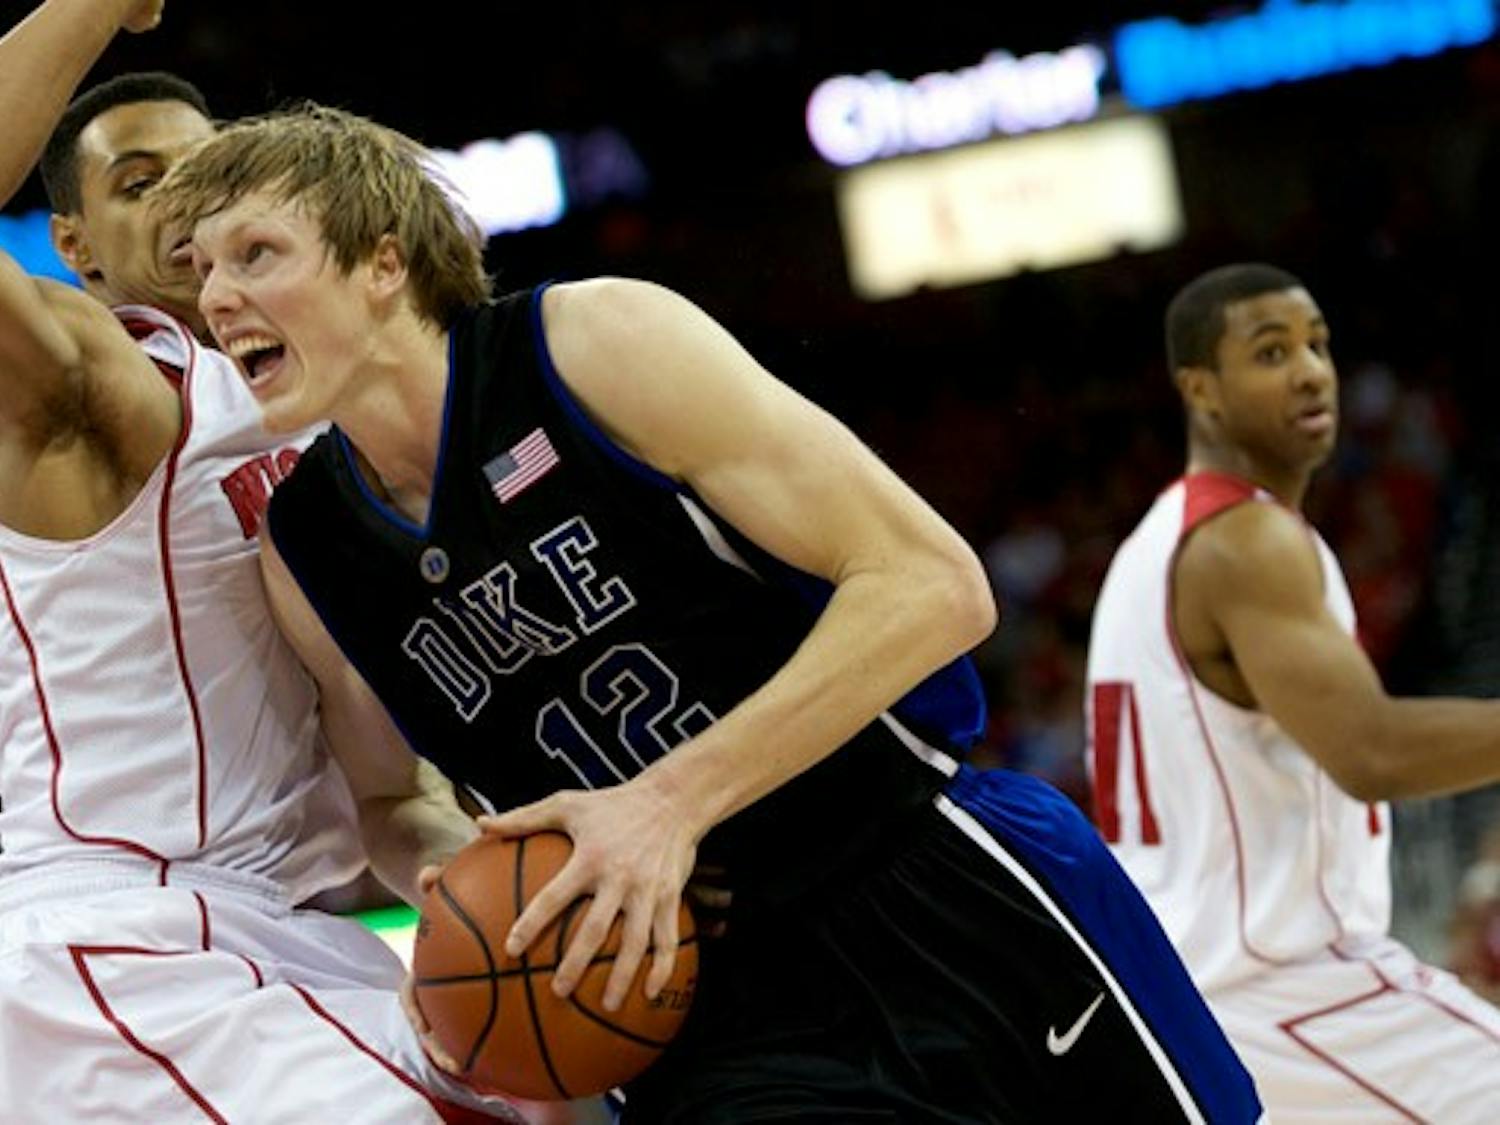 Junior Kyle Singler scored 28 points in a loss to Wisconsin in Madison, one of Duke’s only two defeats. The Blue Devils have yet to win a true road game this season.